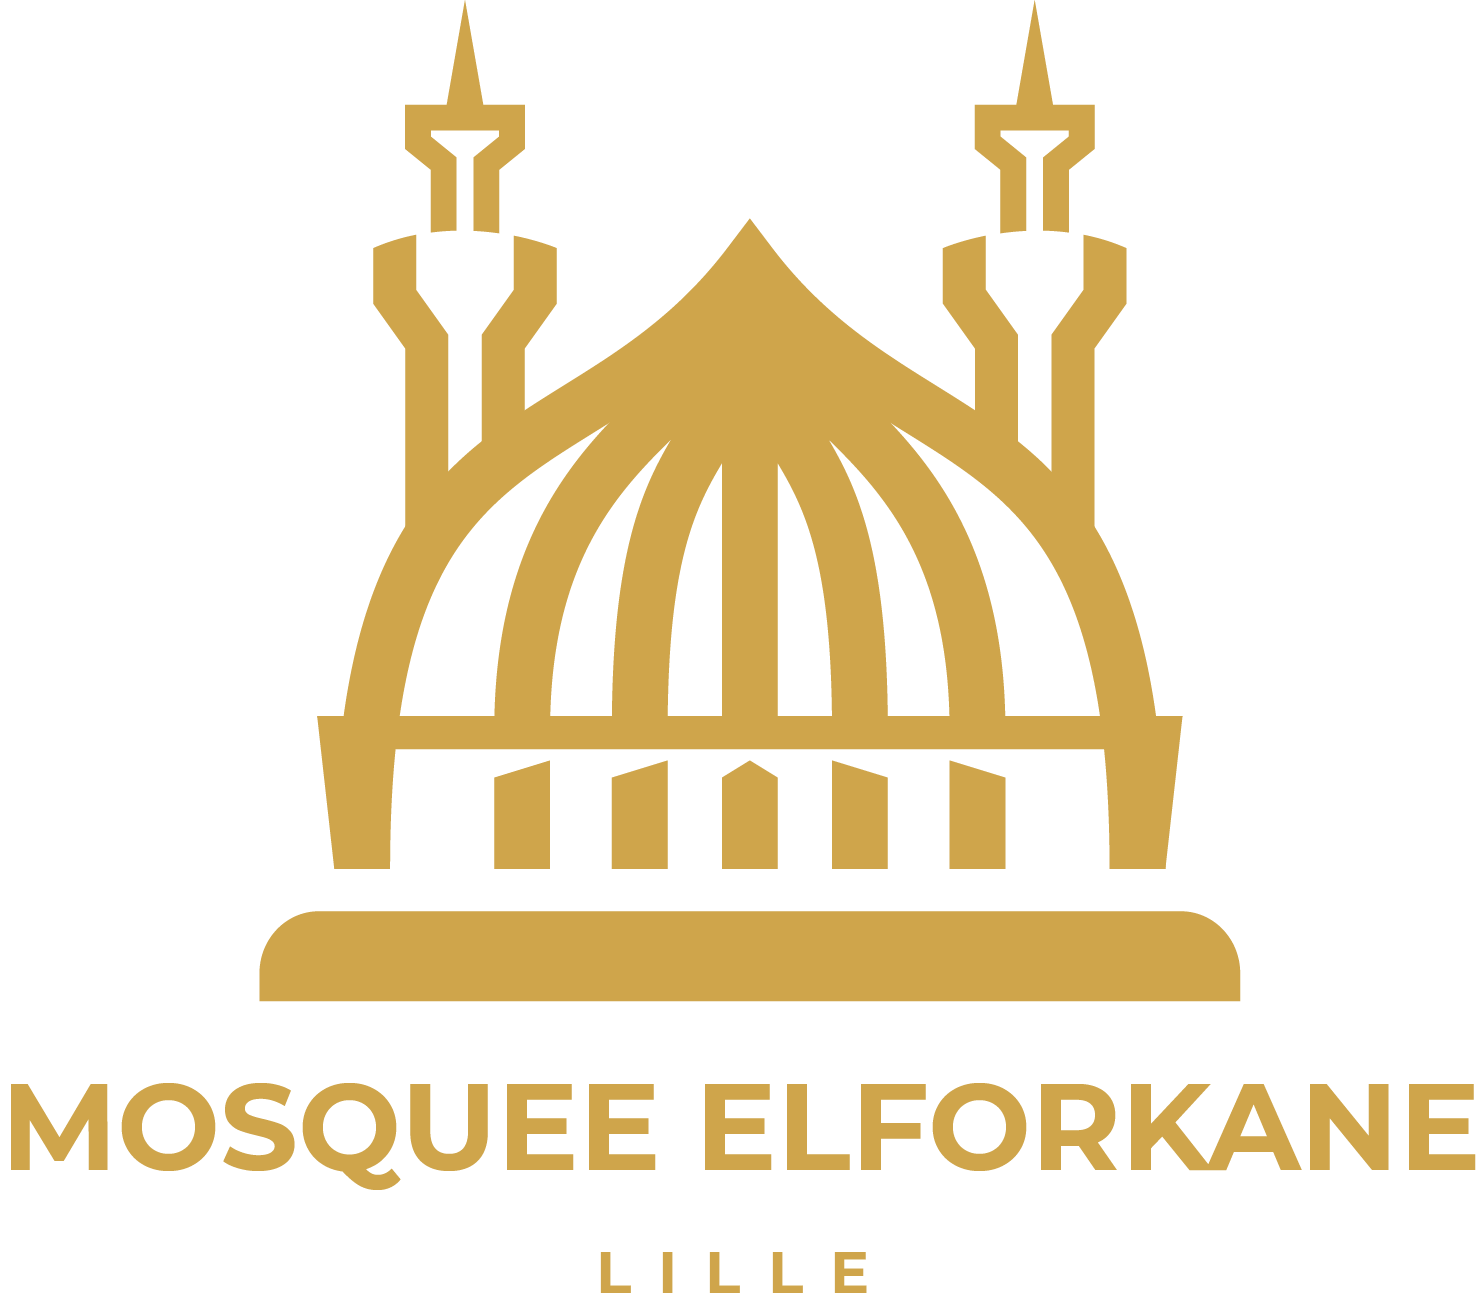 Mosquee Elforkane Lille